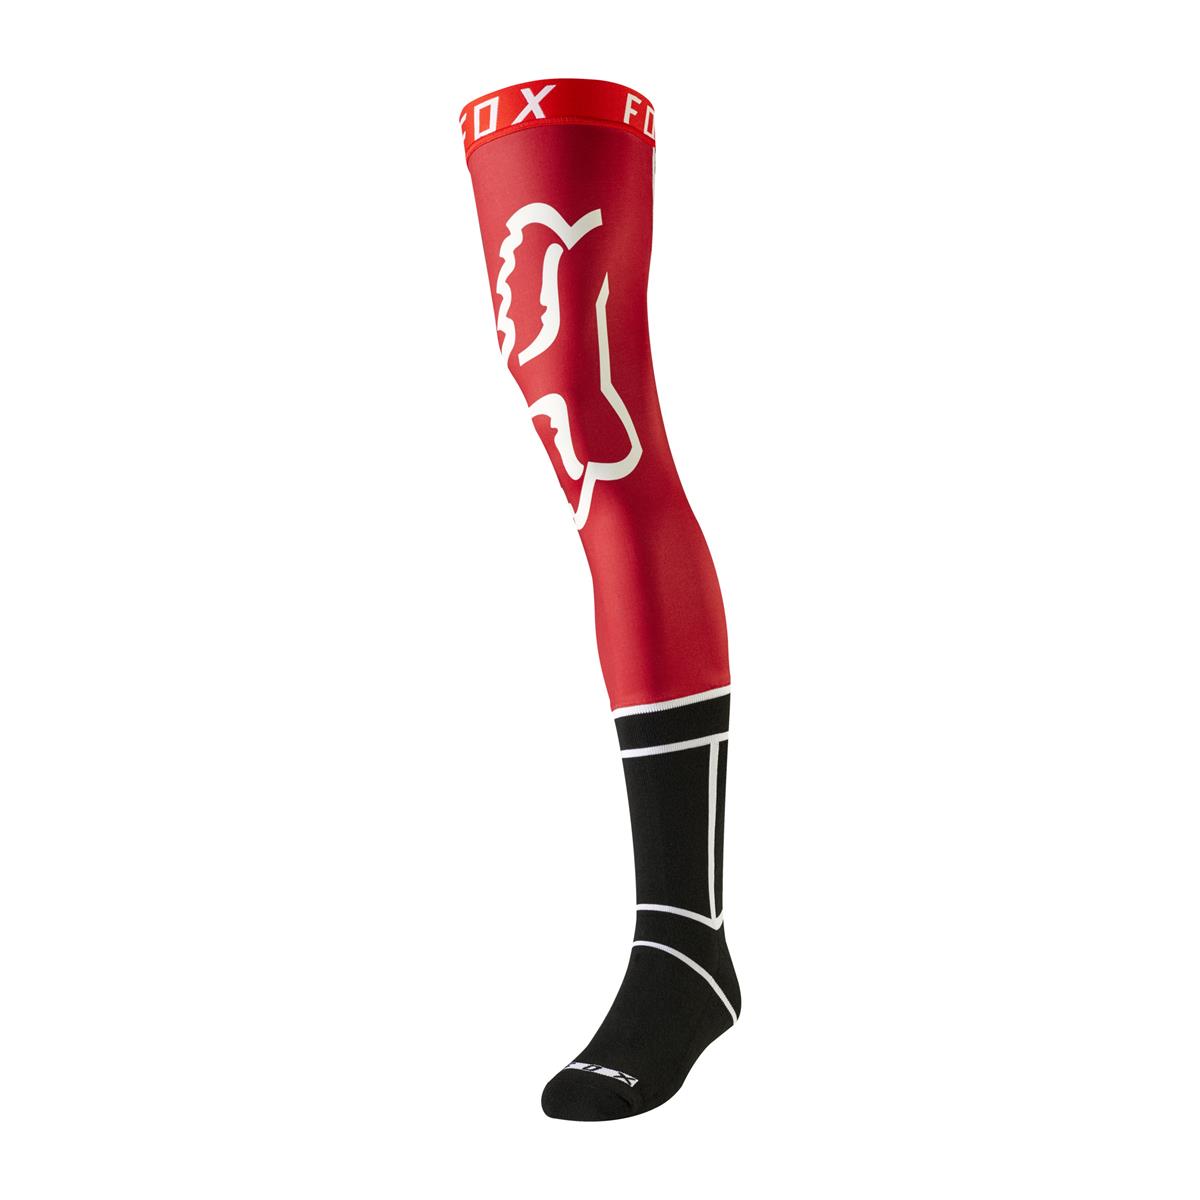 Fox Chaussettes Knee Brace Flame Red